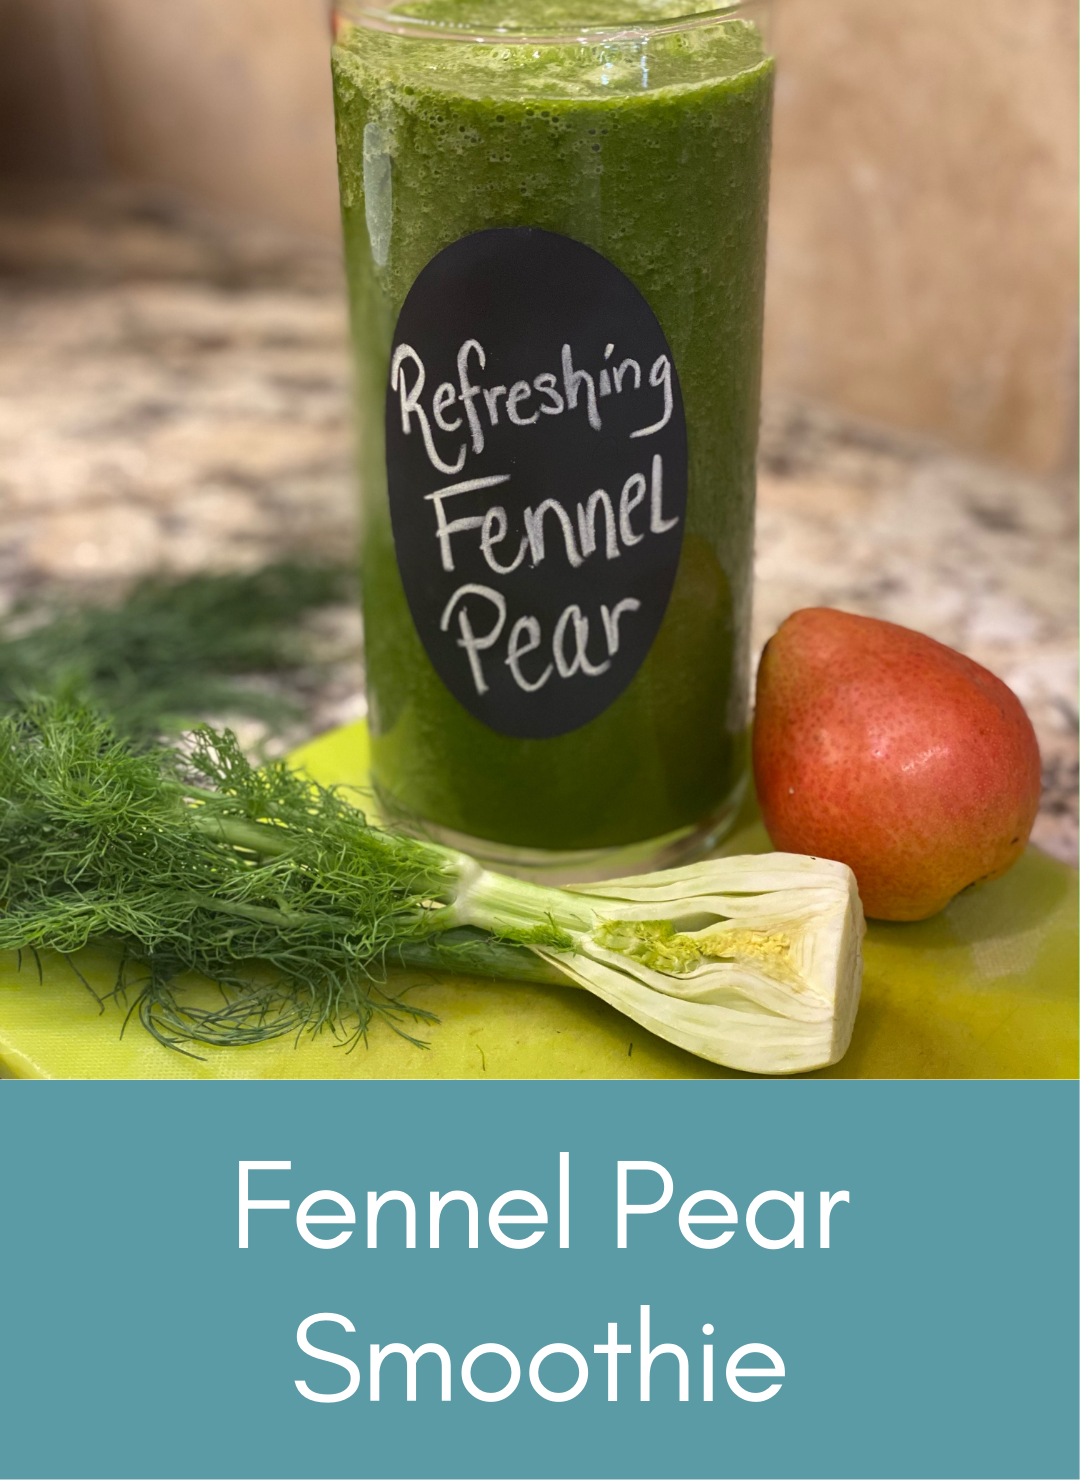 Vegan fennel pear smoothie Picture with link to recipe